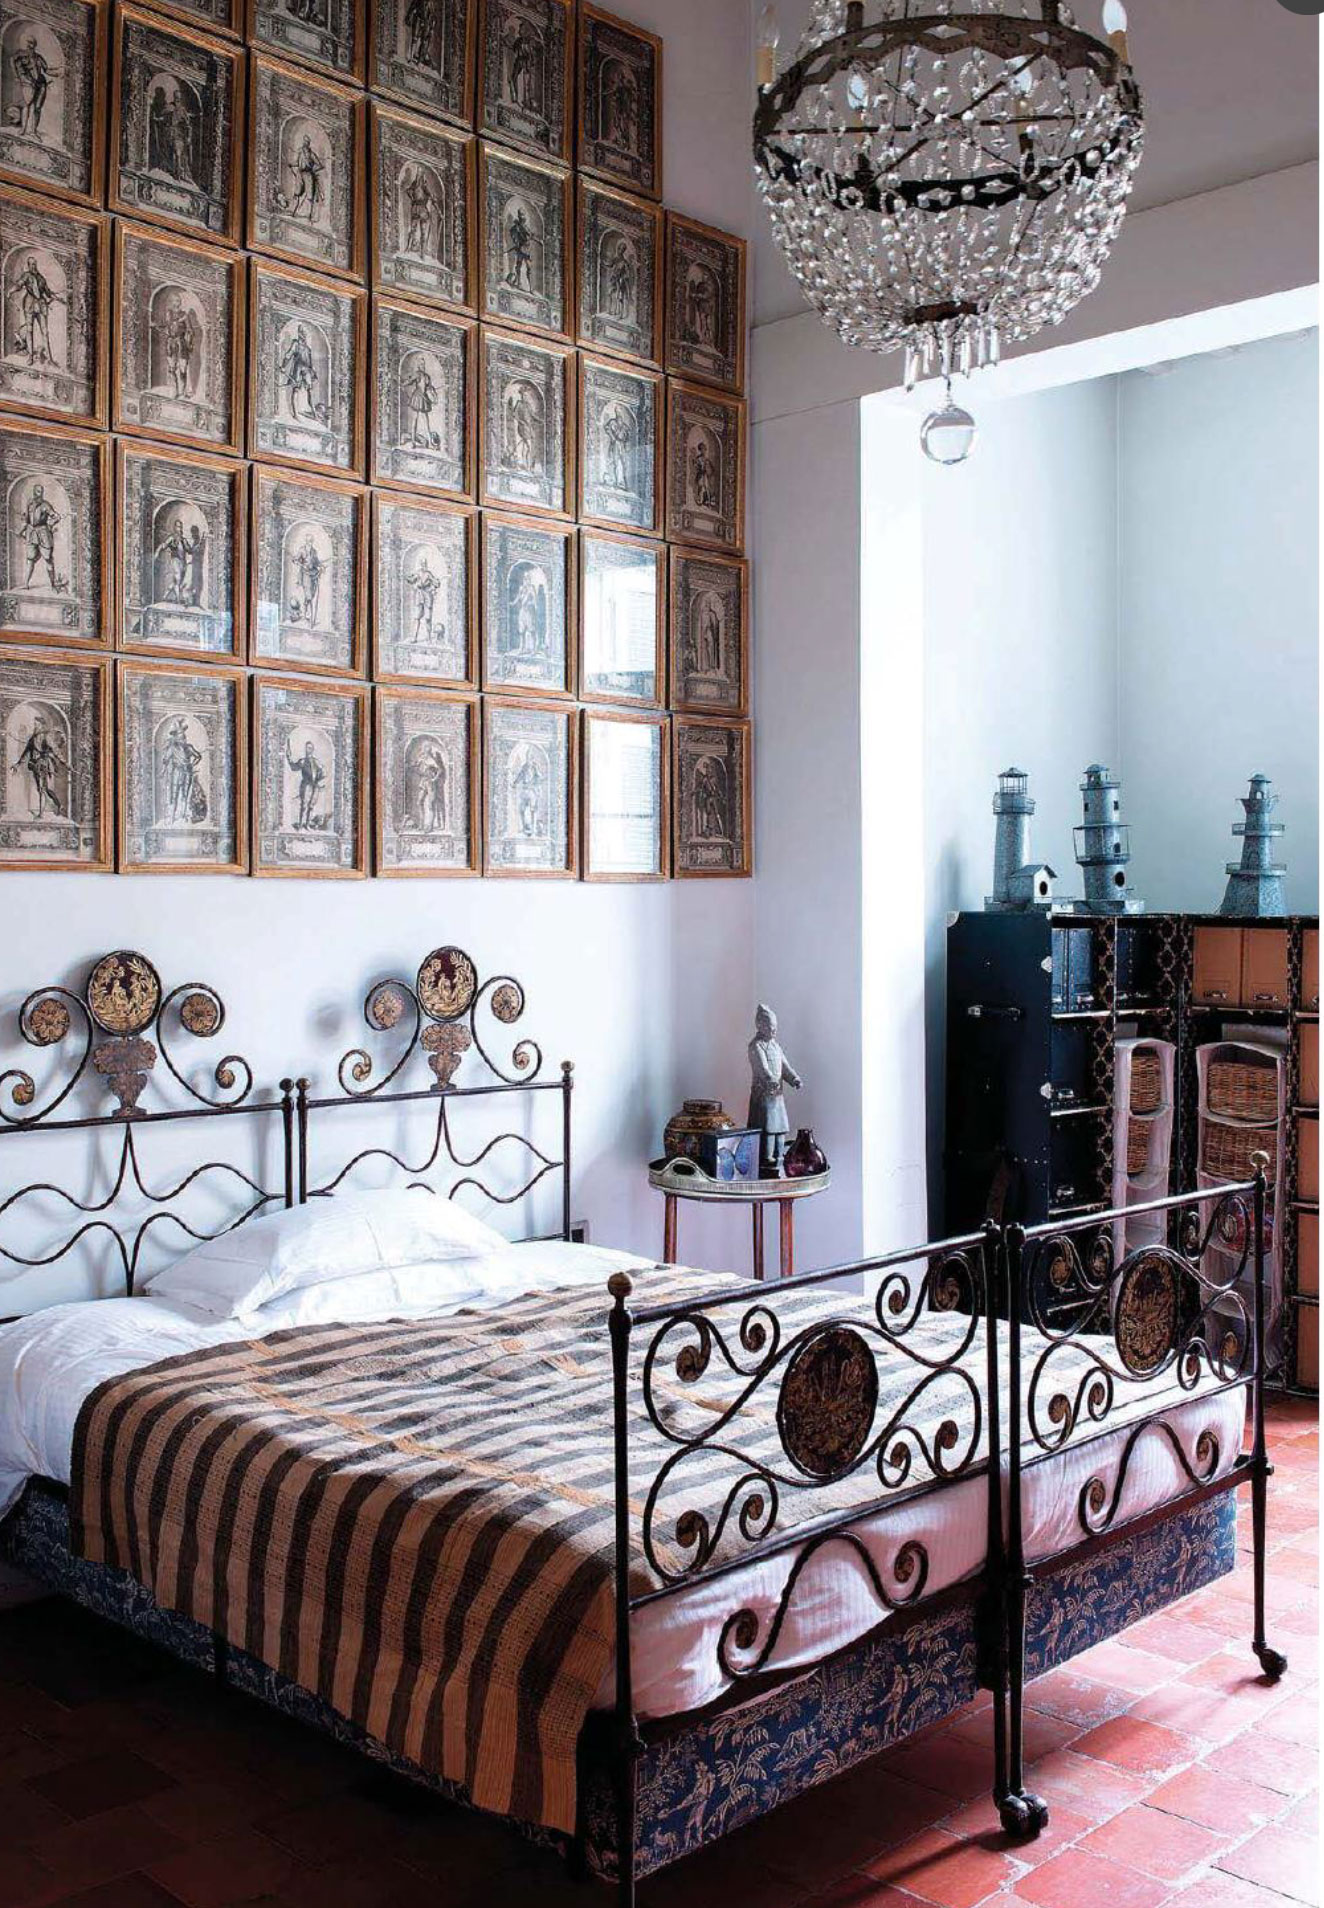 Antique Armor Engravings Over The Bed